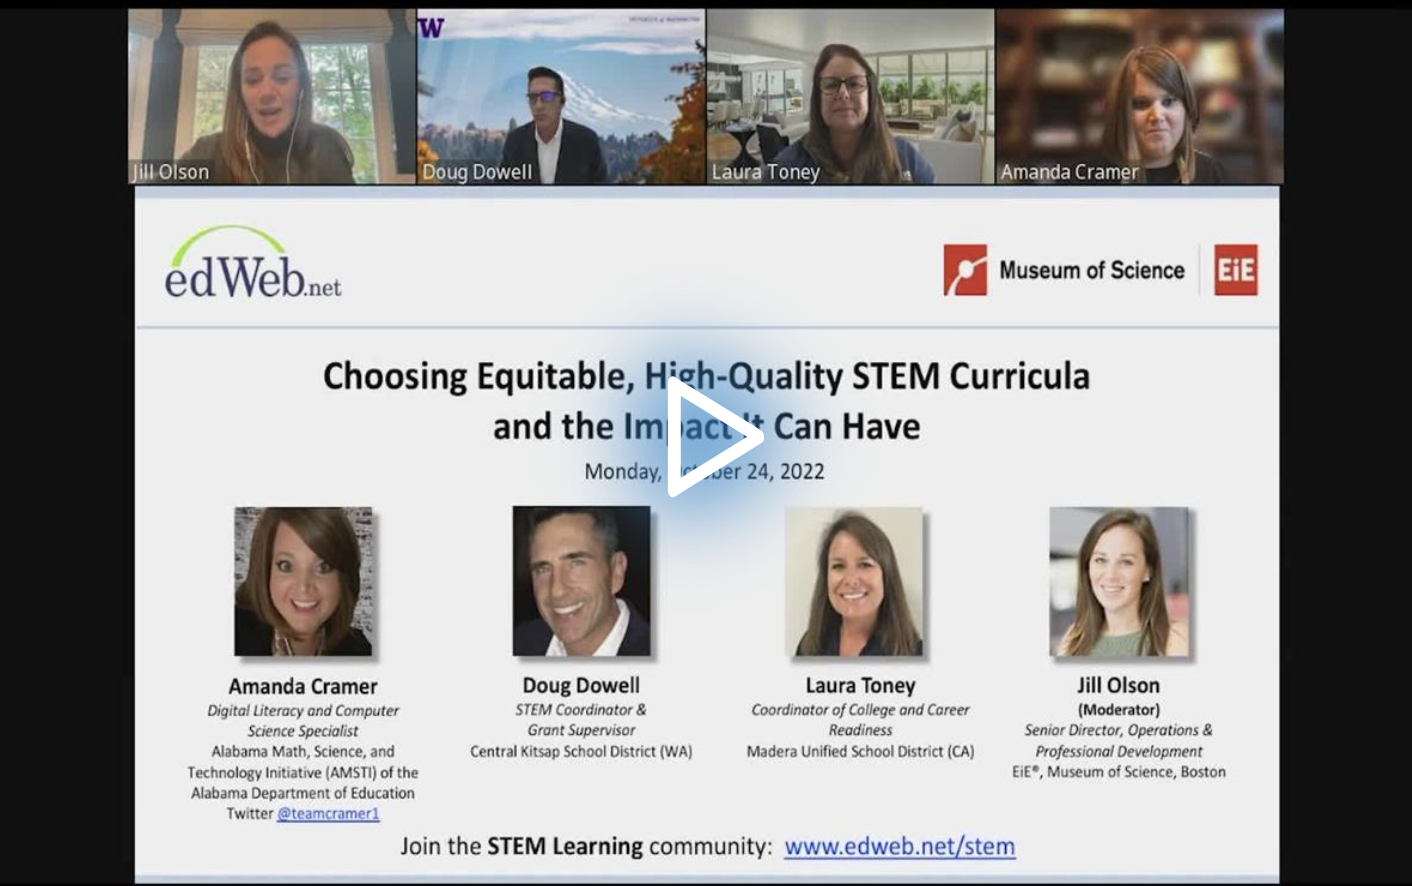 Choosing Equitable, High-Quality STEM Curricula and the Impact It Can Have edLeader Panel recording image